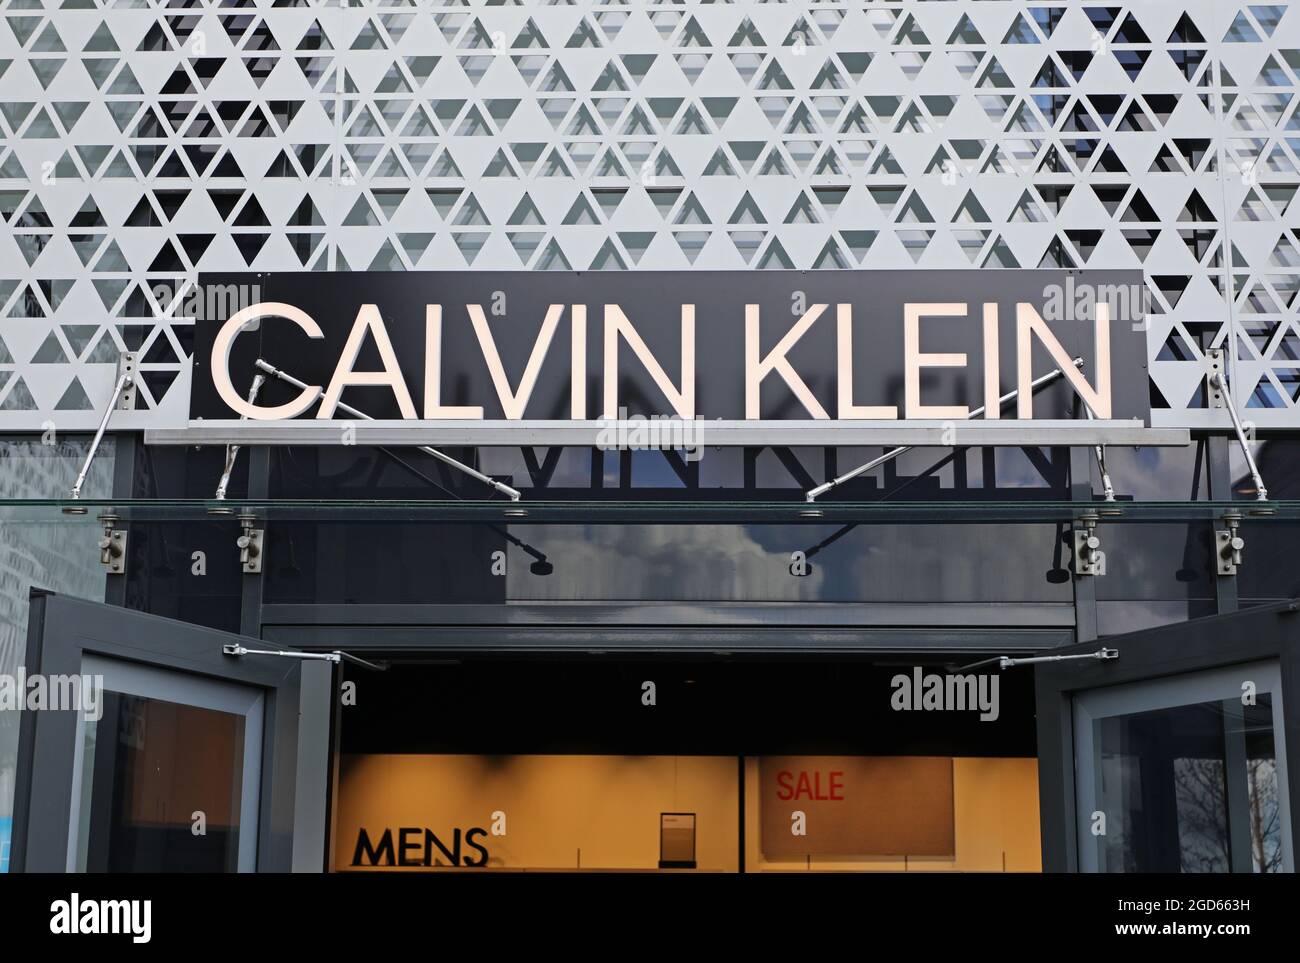 Calvin Klein sign at Hede Fashion Outlet Stock Photo - Alamy